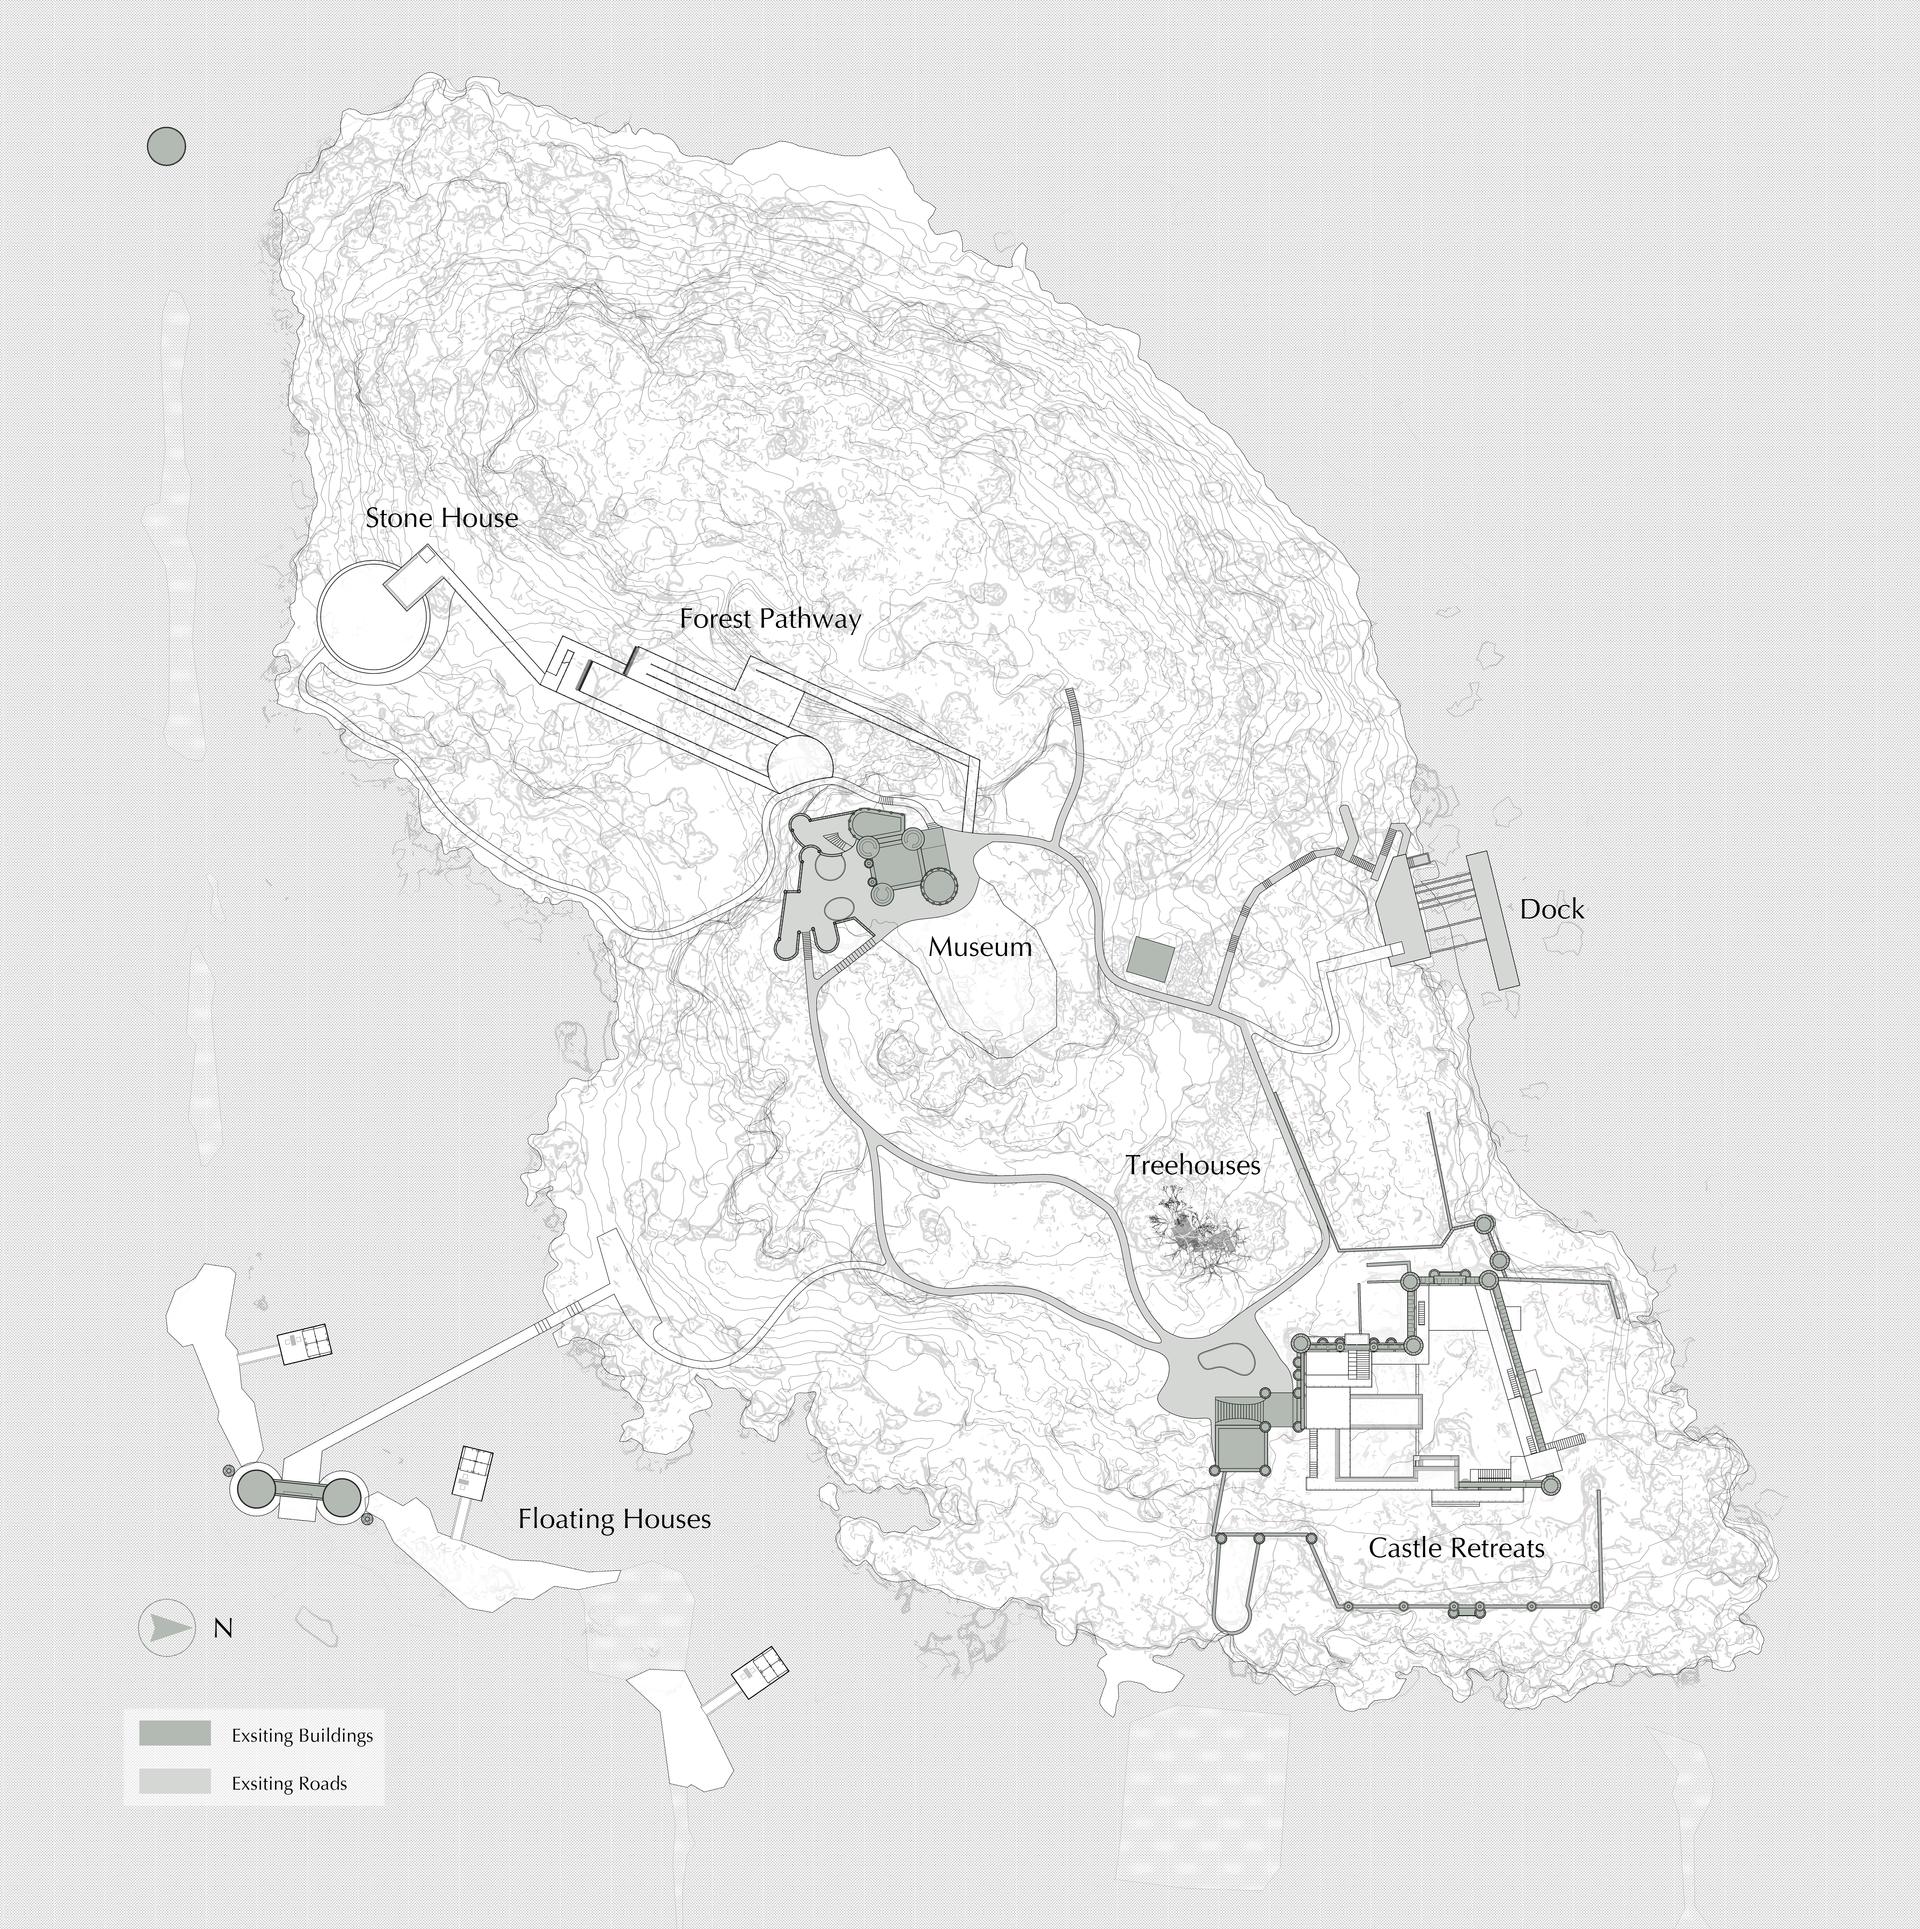 The Pollepel Island after the design